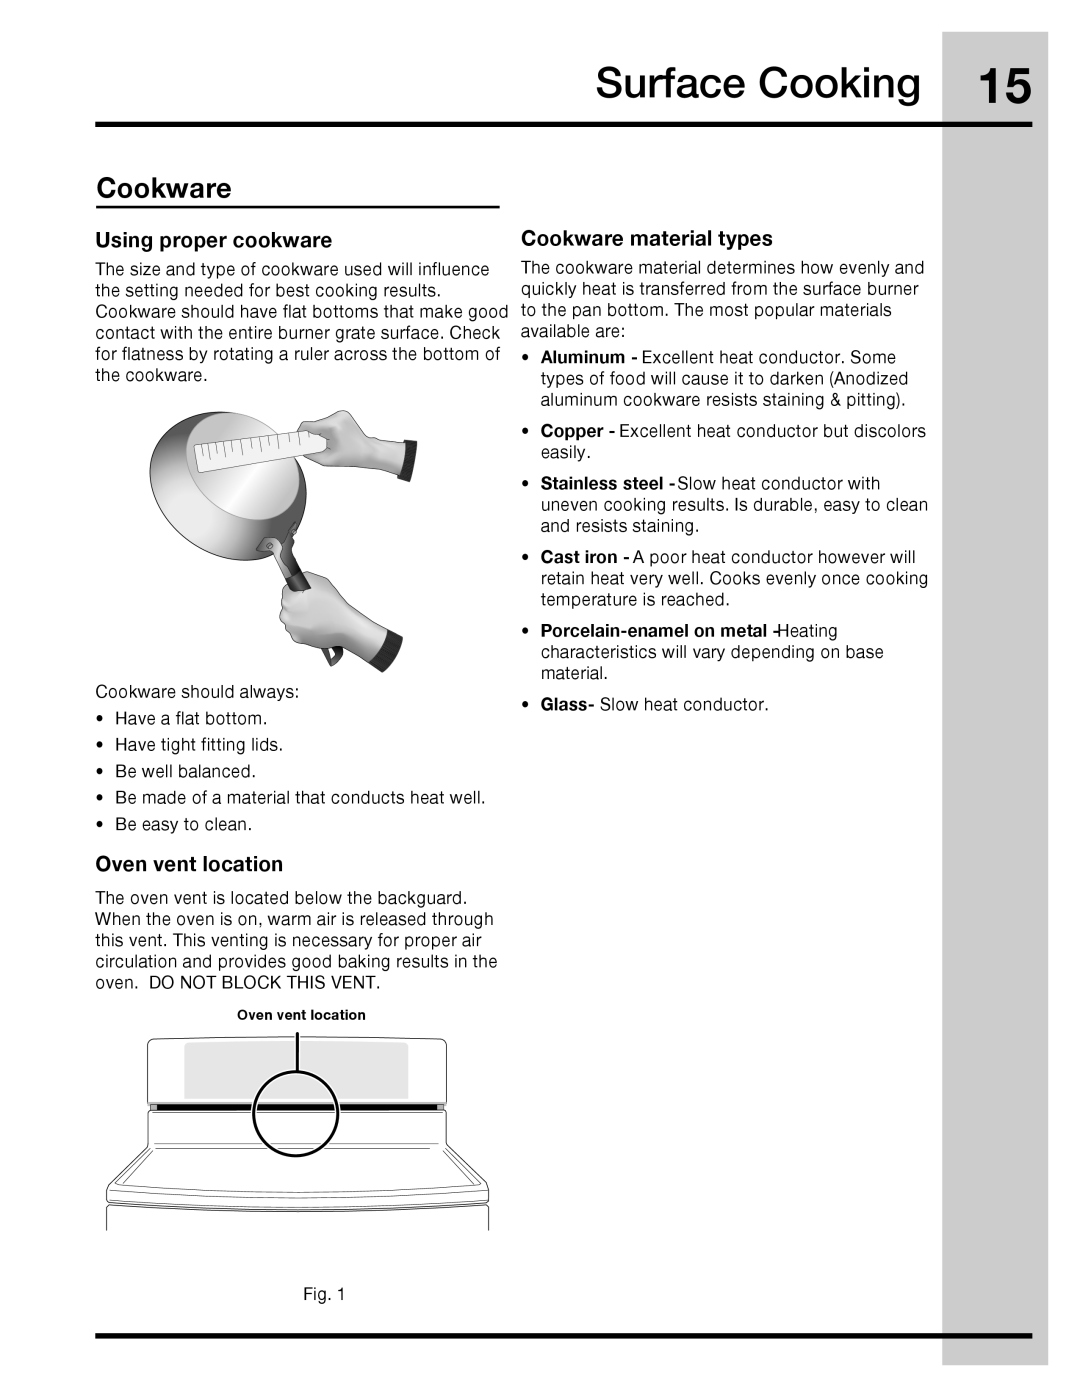 Electrolux 316471113 manual Surface Cooking, Using proper cookware, Oven vent location, Cookware material types 